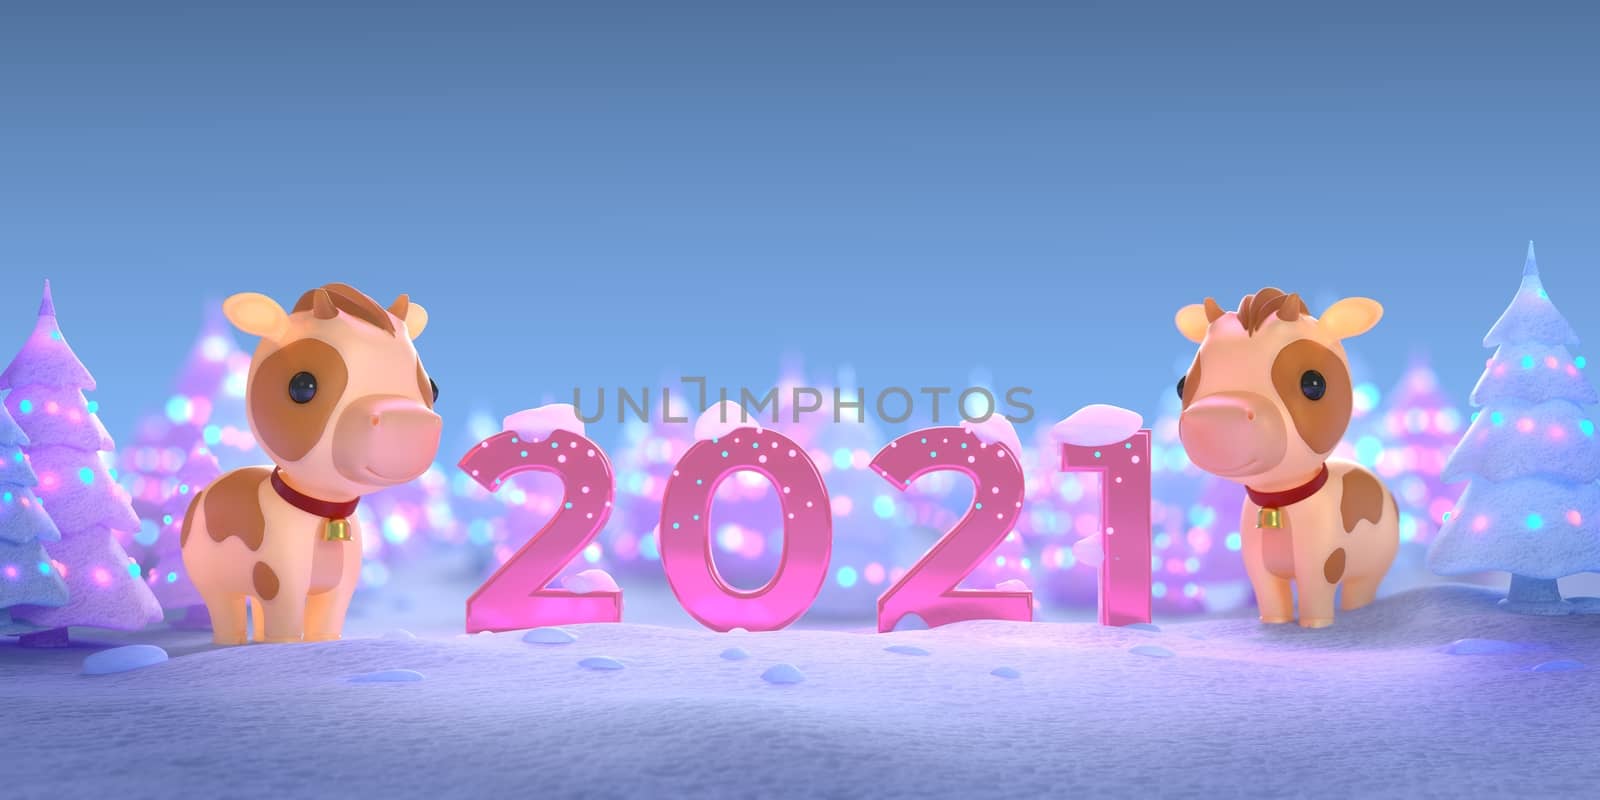 happy new year 2021 concept for the winter season. Year of the ox cow character. pine tree with snow decorates by a celebration light. 2021 pink number. 3d illustrator.